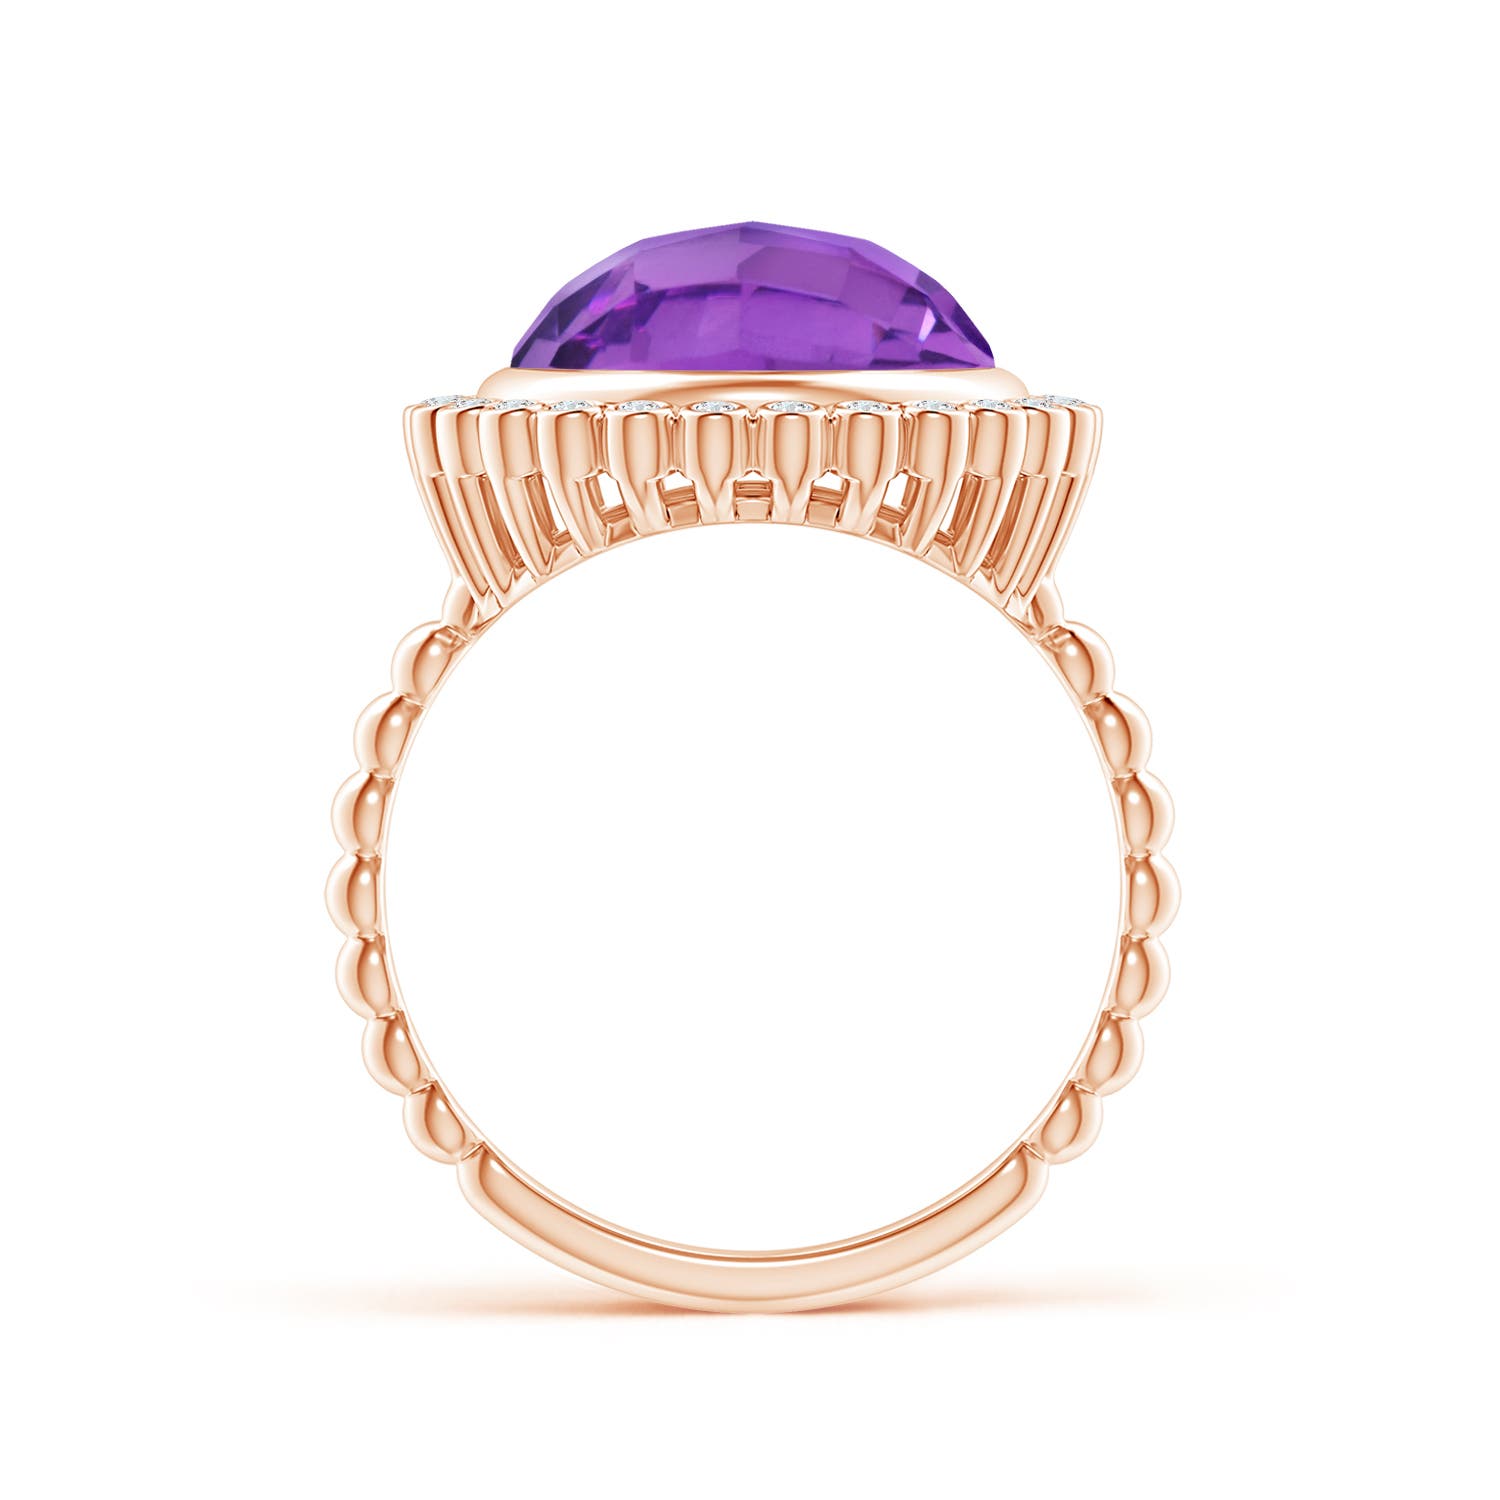 AA - Amethyst / 5.01 CT / 14 KT Rose Gold